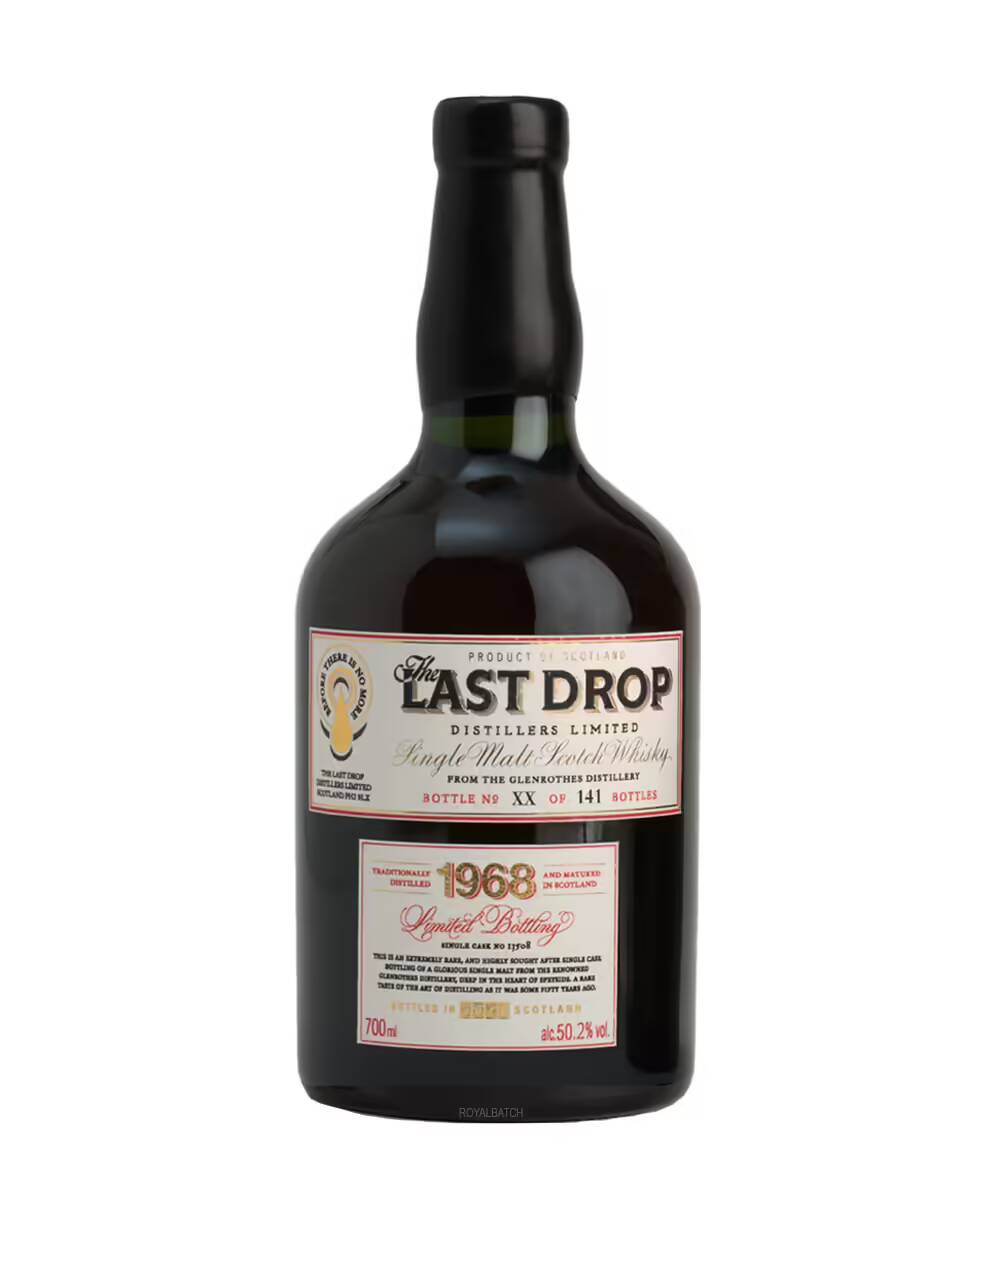 The Last Drop 1968 Year Old Cask 13508 Bottle No 140 Scotch Whisky